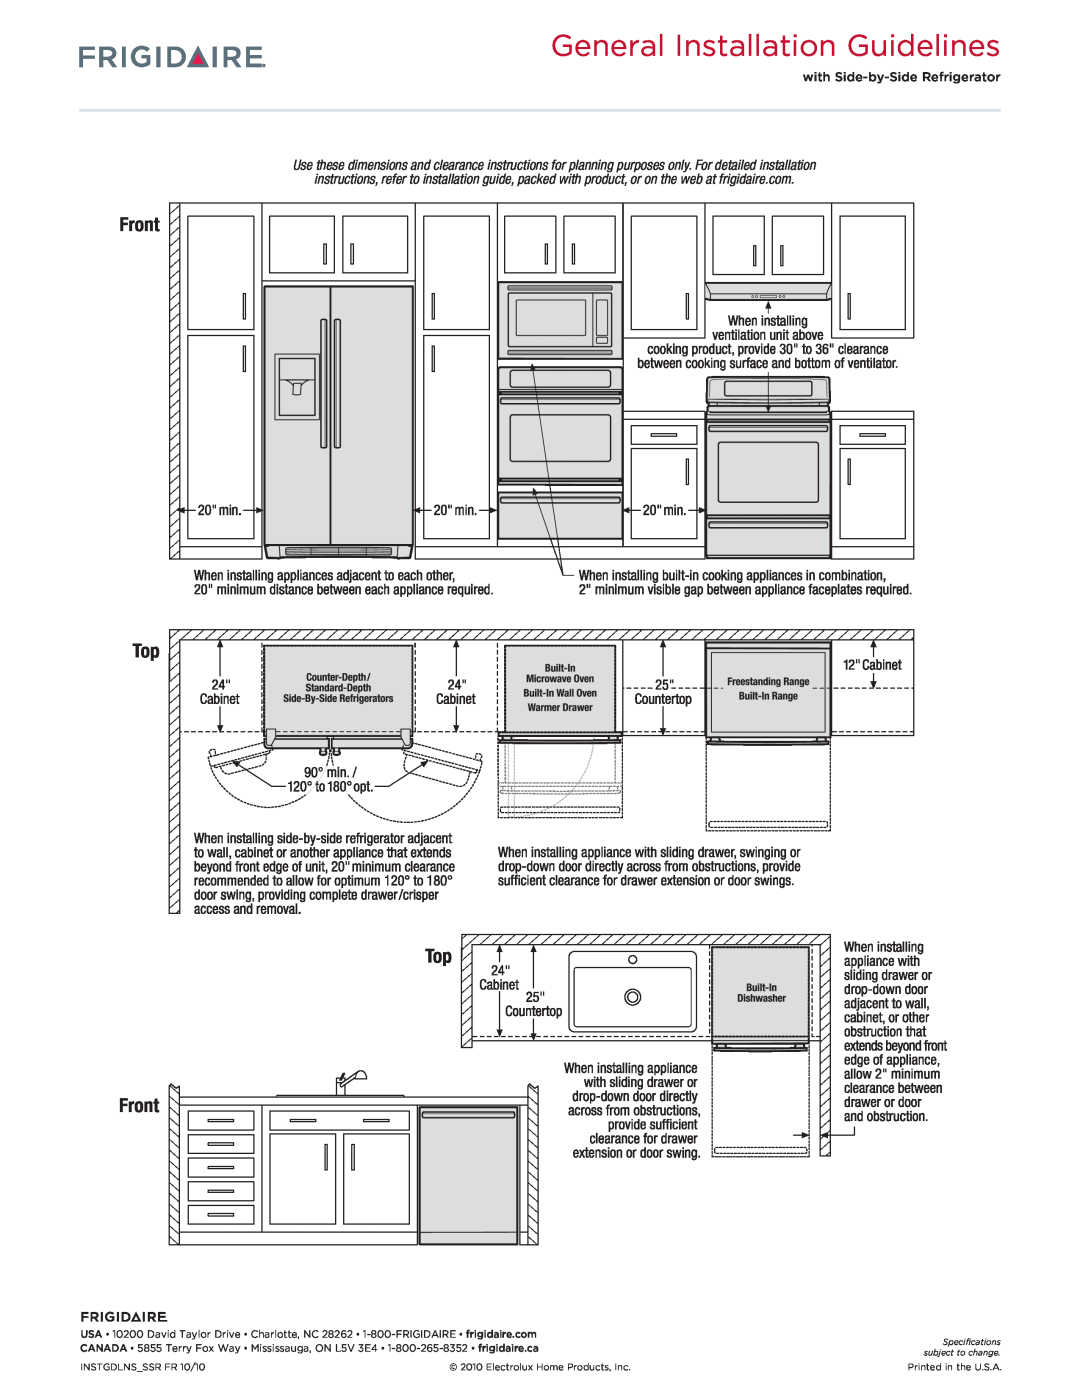 Frigidaire FGEW2745K F/W/B dimensions General Installation Guidelines, Top Front 